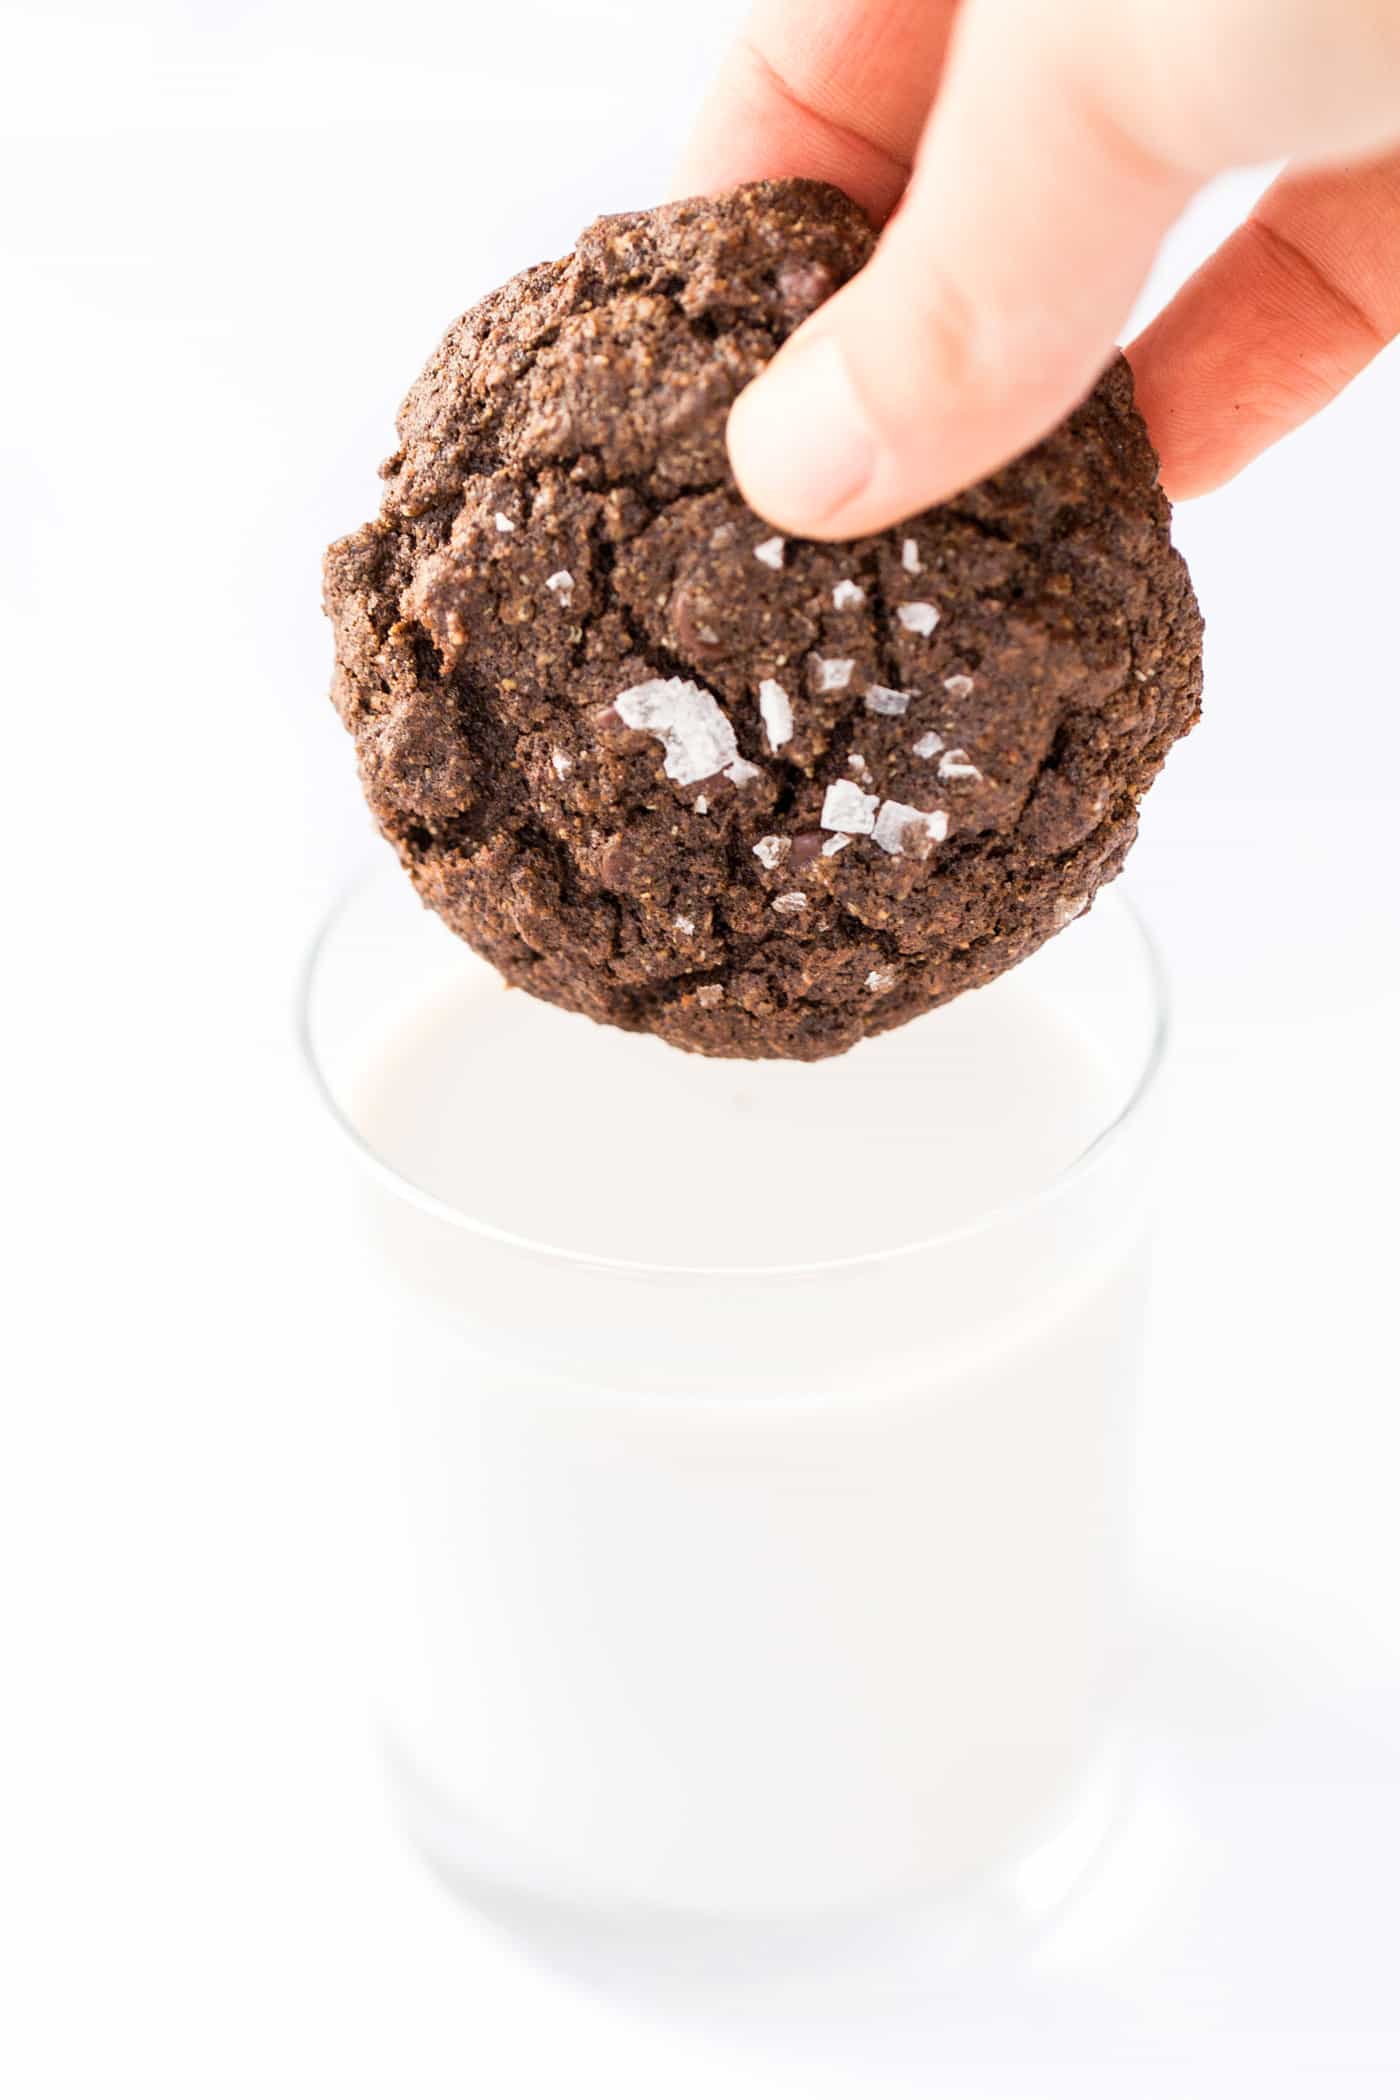 healthy double chocolate chip quinoa cookies with sea salt